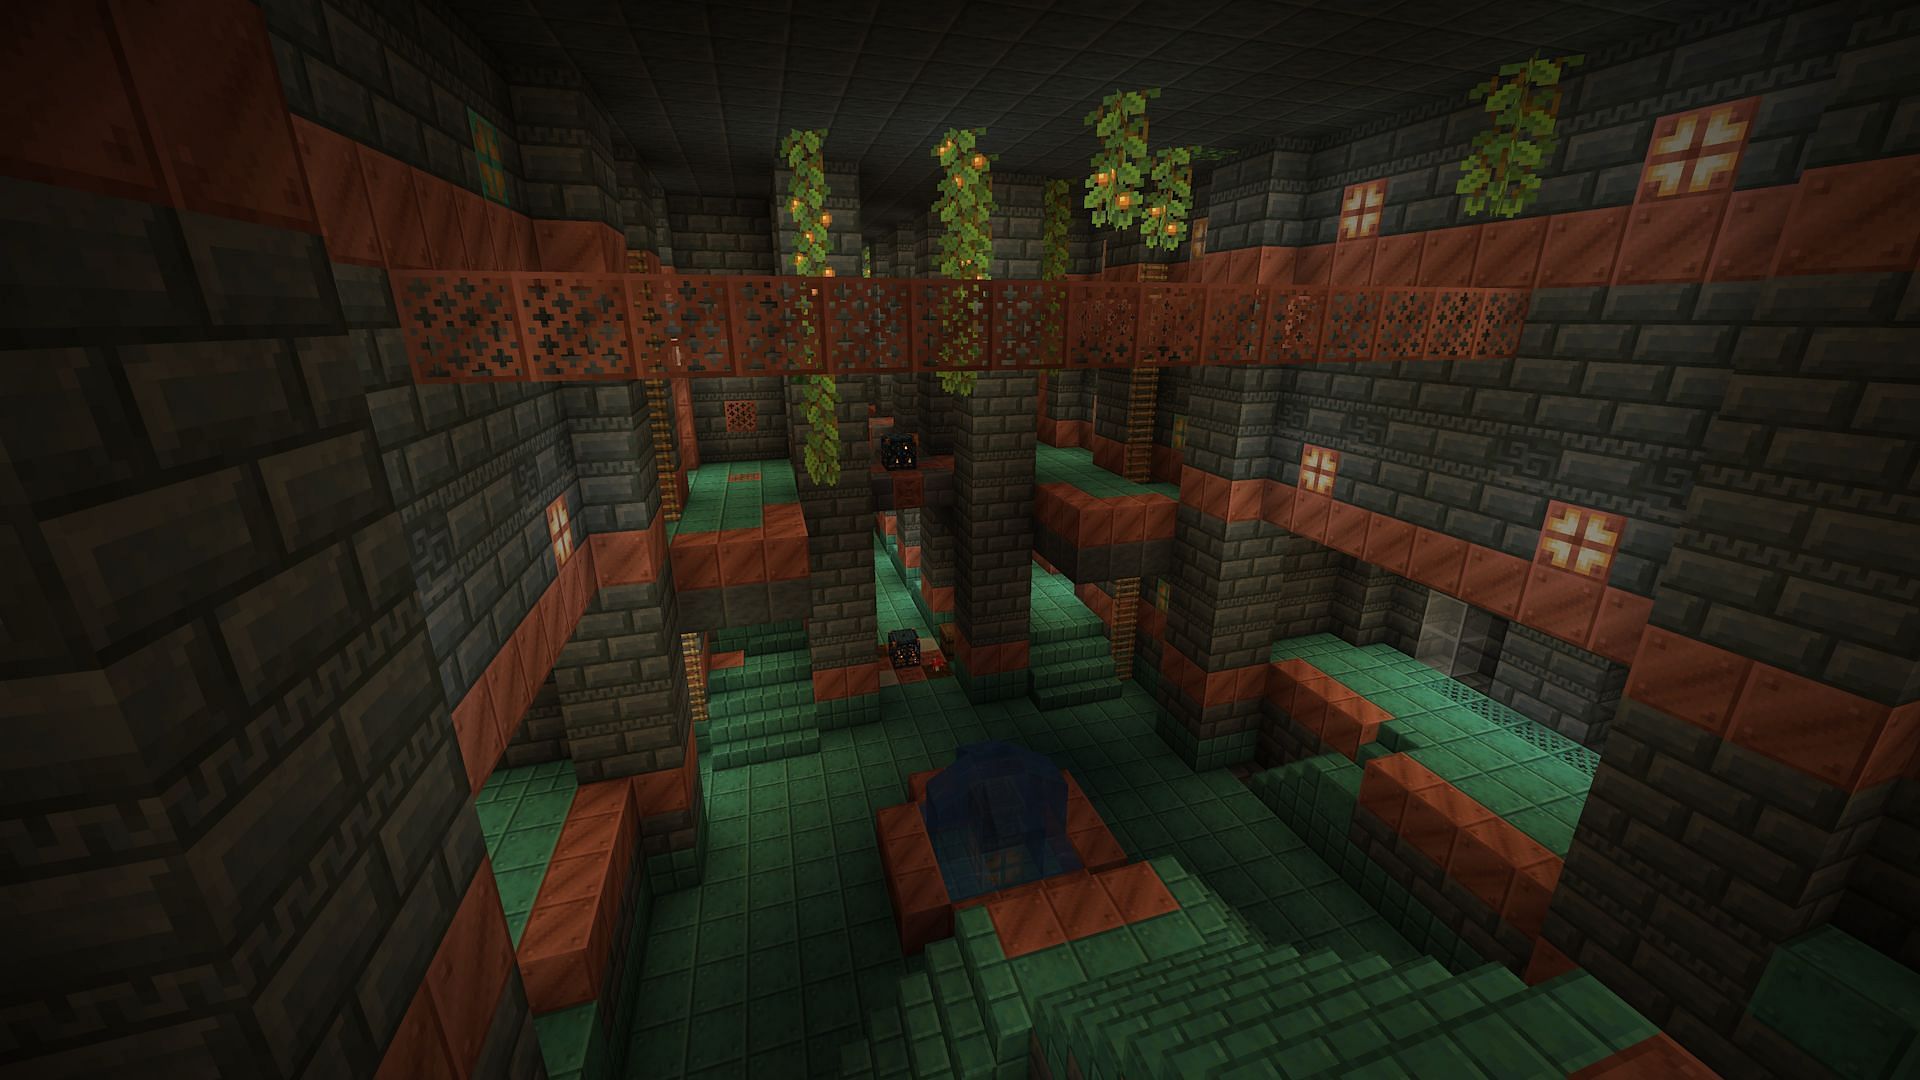 Trial chambers can appear in any cave biome, including lush caves (Image via Mojang)